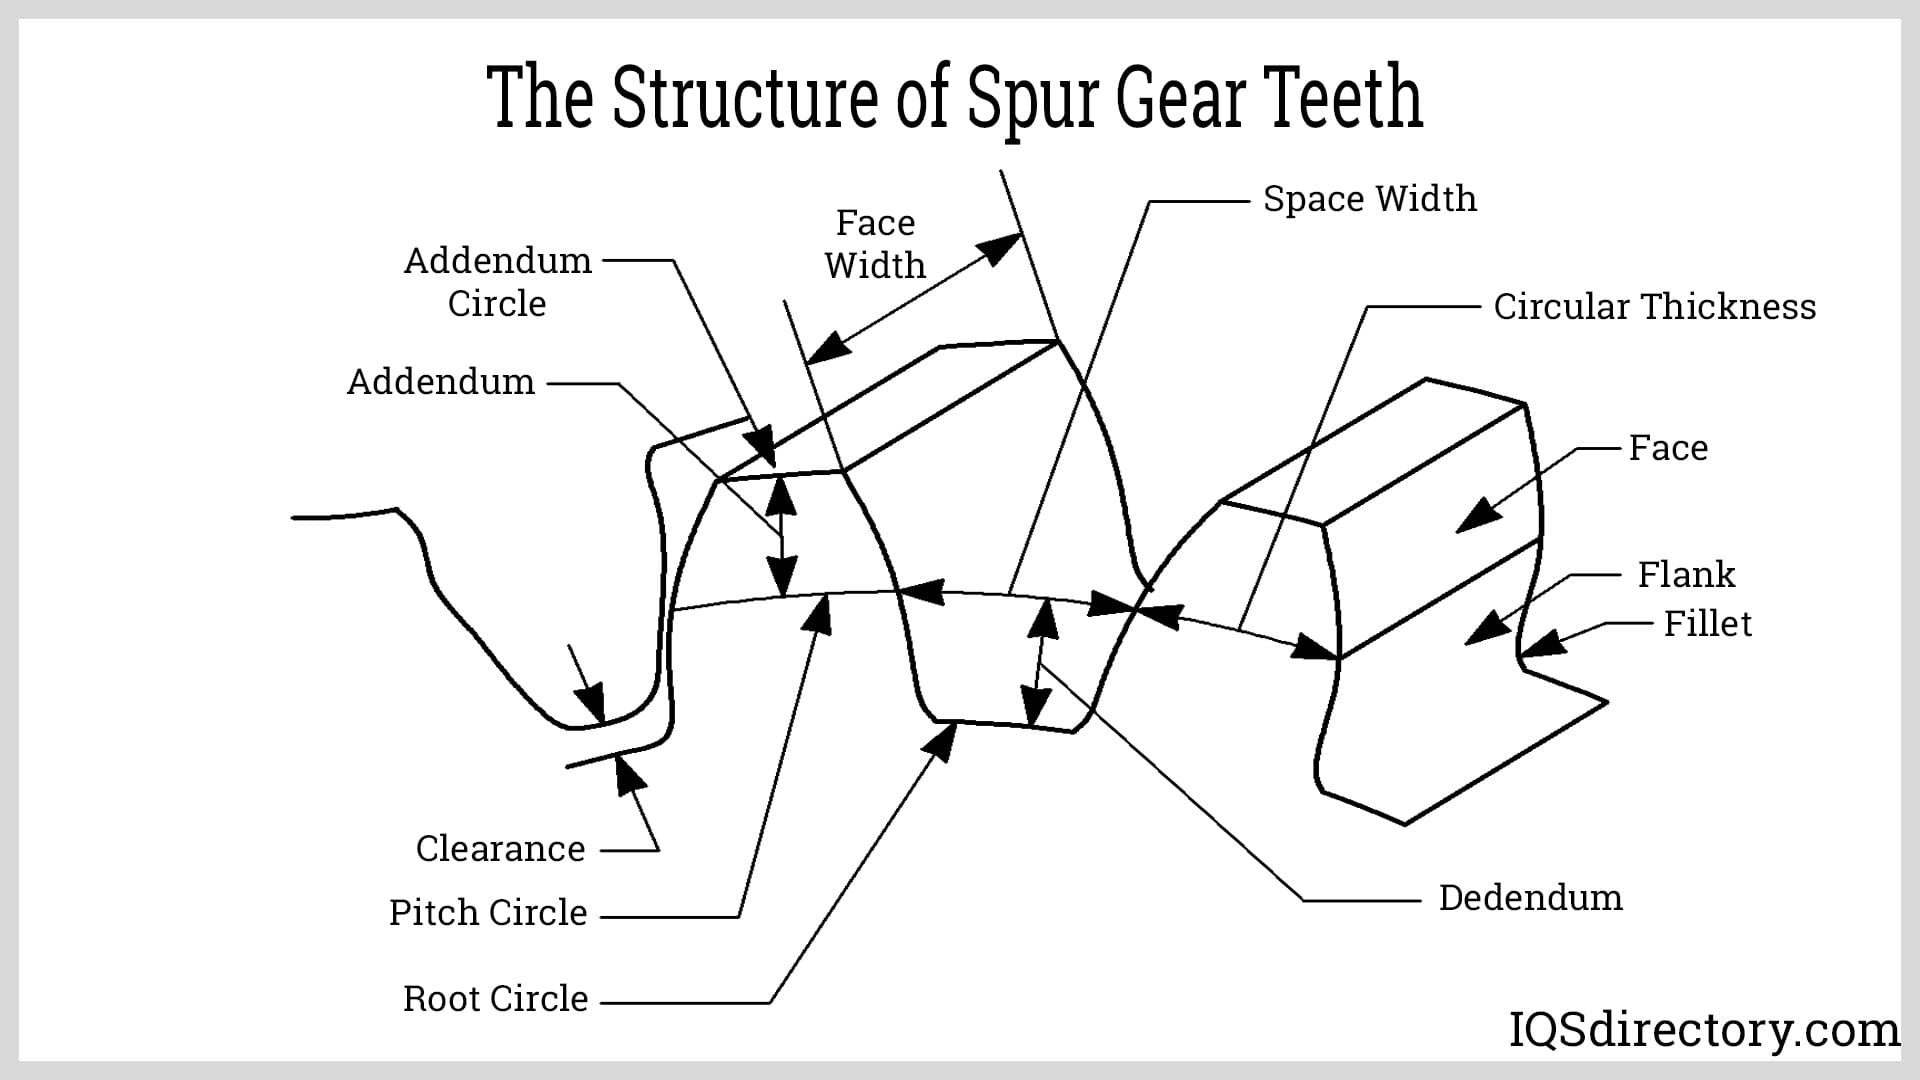 The Structure of Spur Gear Teeth